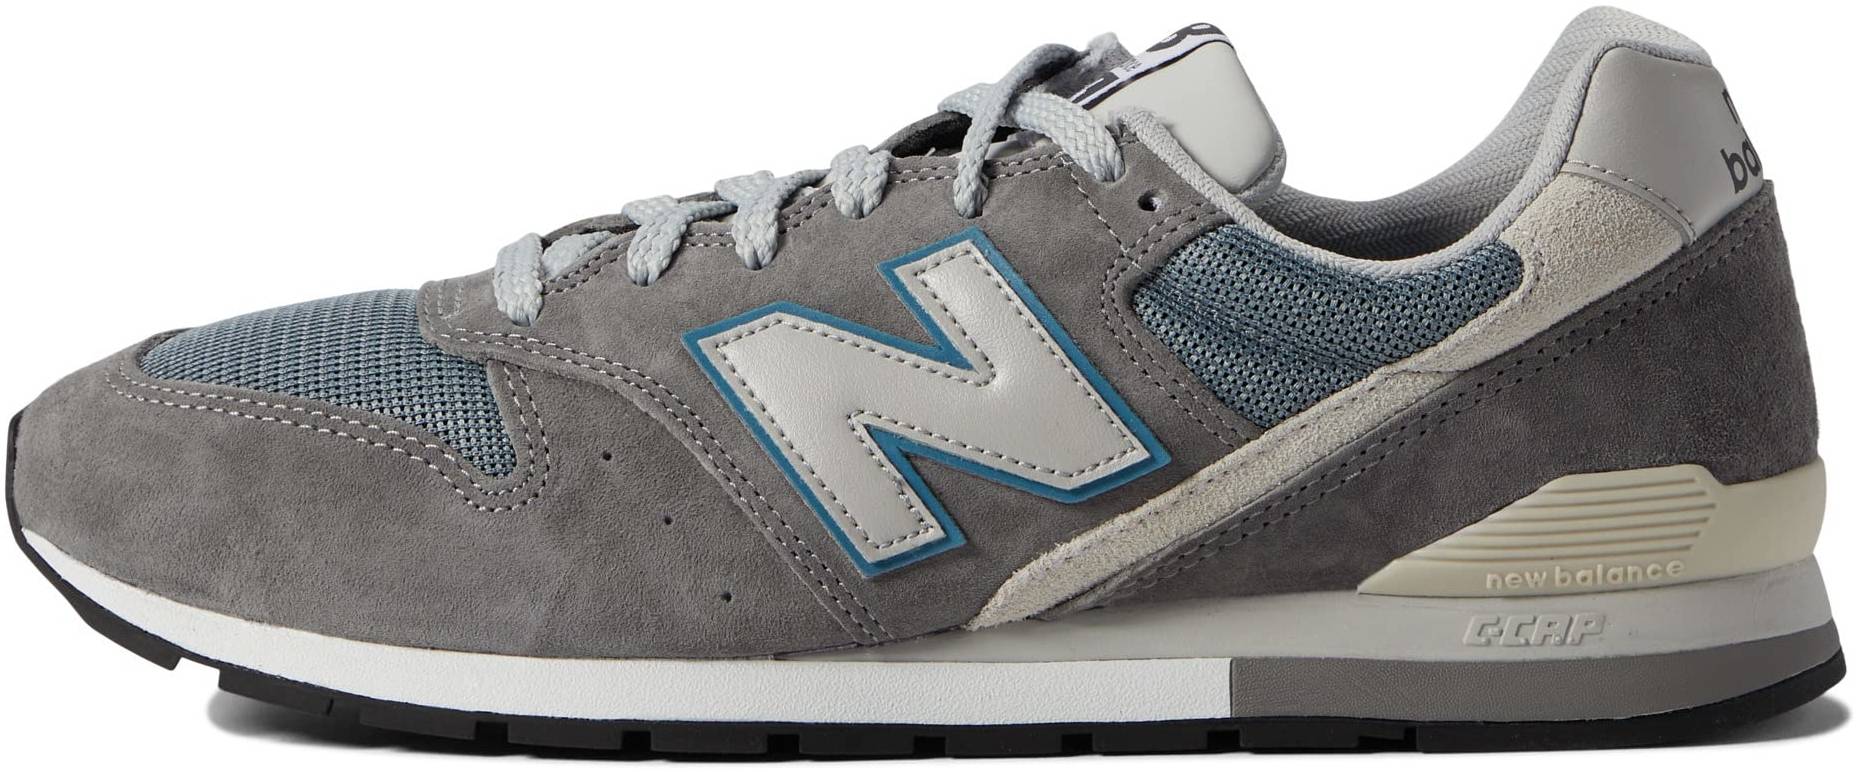 New Balance 996 sneakers in 7 colors (only $60) | RunRepeat